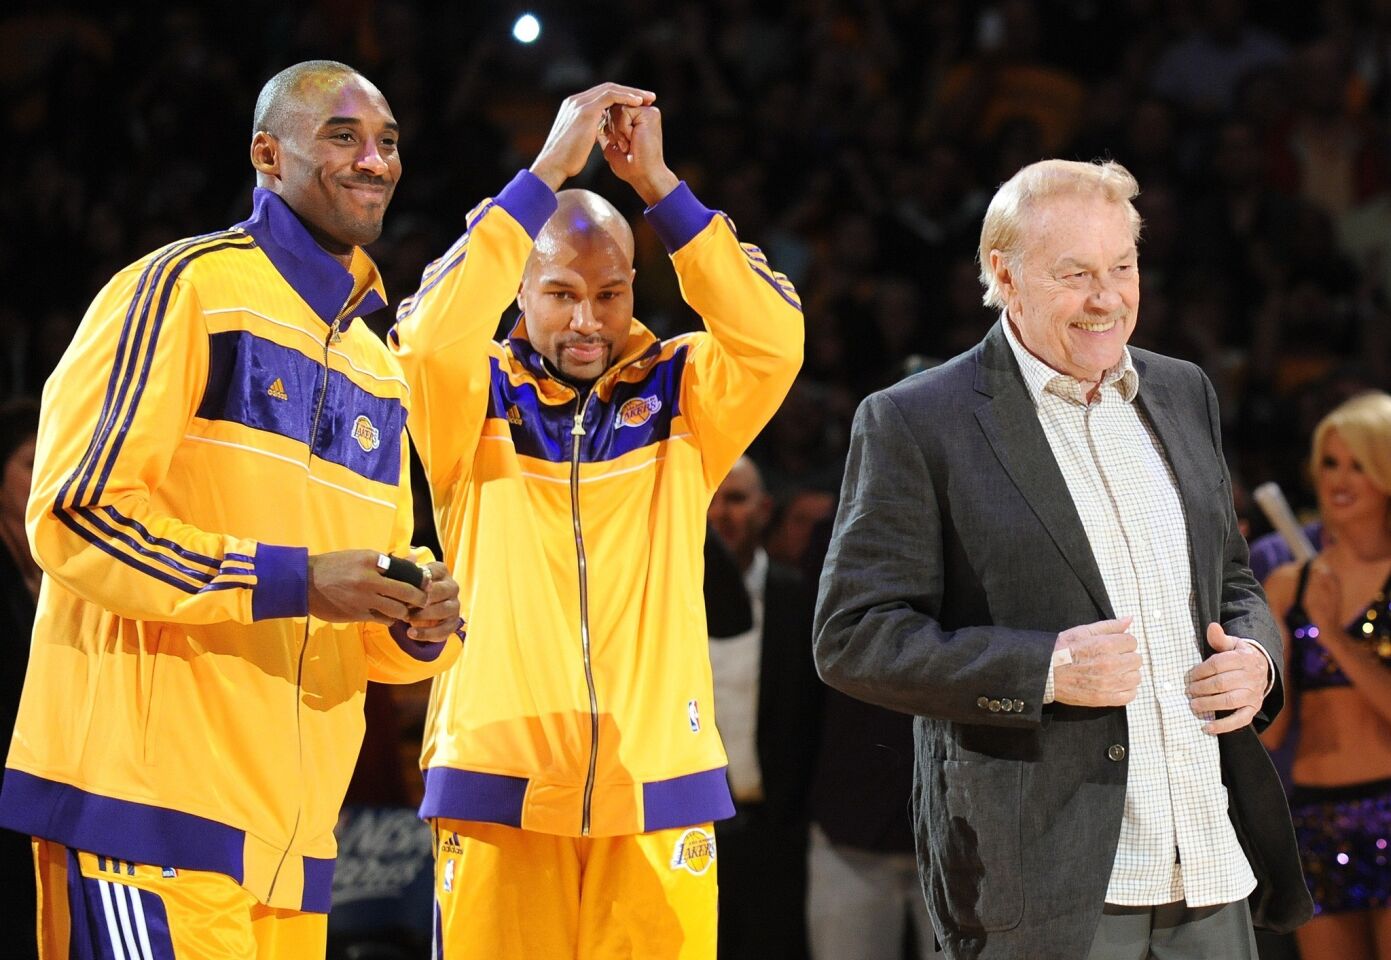 Jerry Buss takes center stage, along with Kobe Bryant and Derek Fisher, during the Lakers' ring ceremony after claiming their 16th NBA championship.